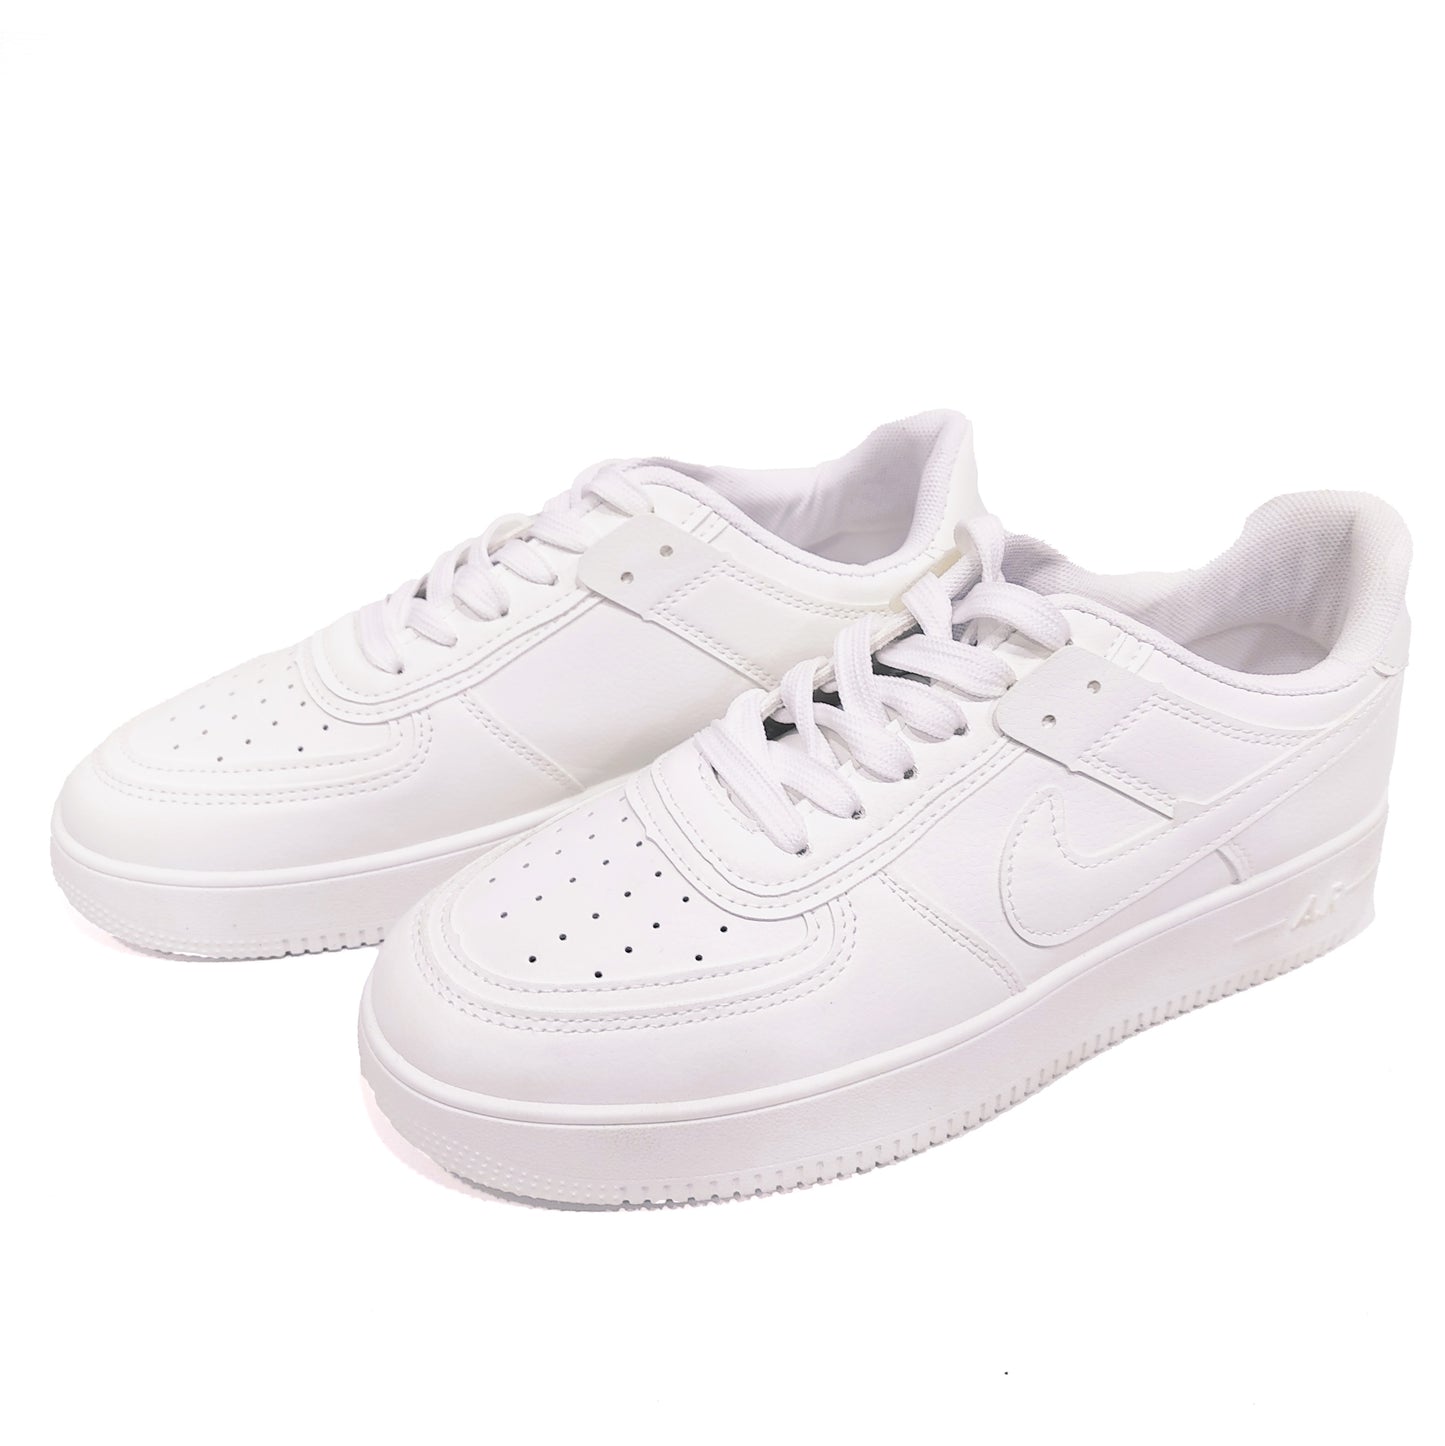 casual footwear | casual sports shoes | mens white casual shoes | mens casual sneaker shoes | black casual shoes | black casual shoes for men | casual sneakers | casual shoes